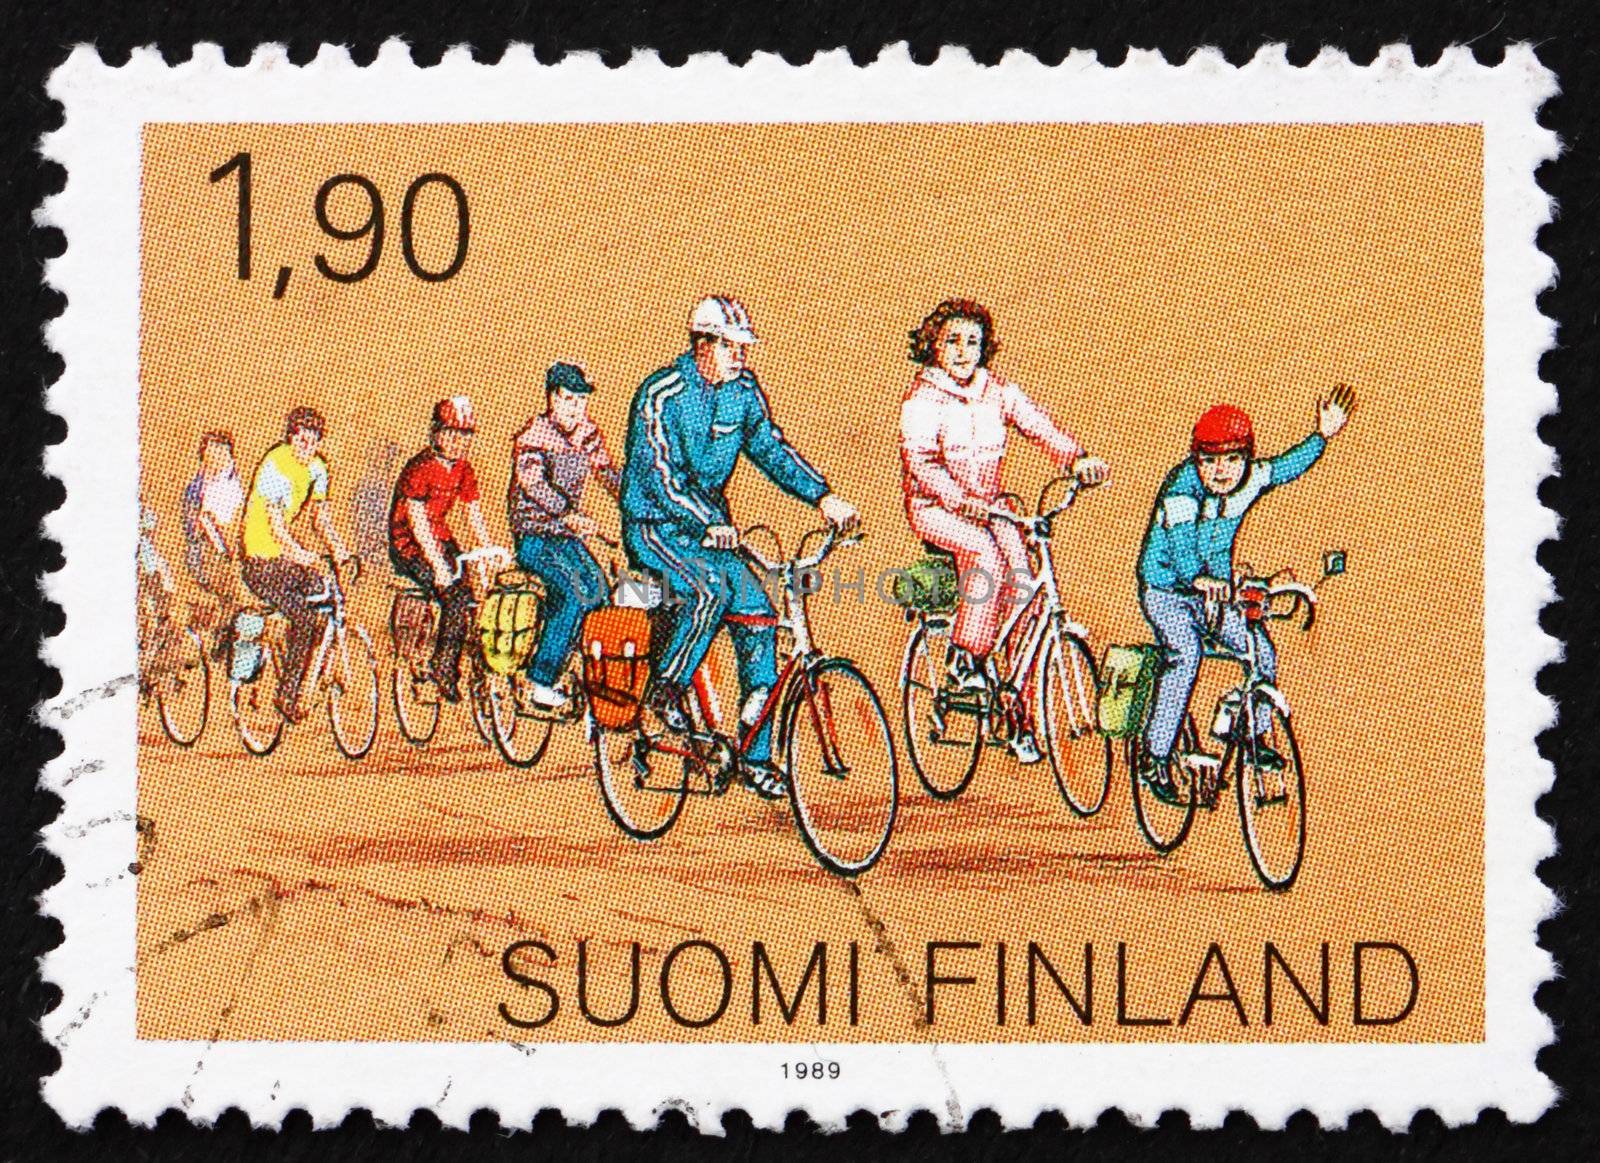 FINLAND - CIRCA 1989: a stamp printed in the Finland shows Cycling, Sports for the Family, circa 1989